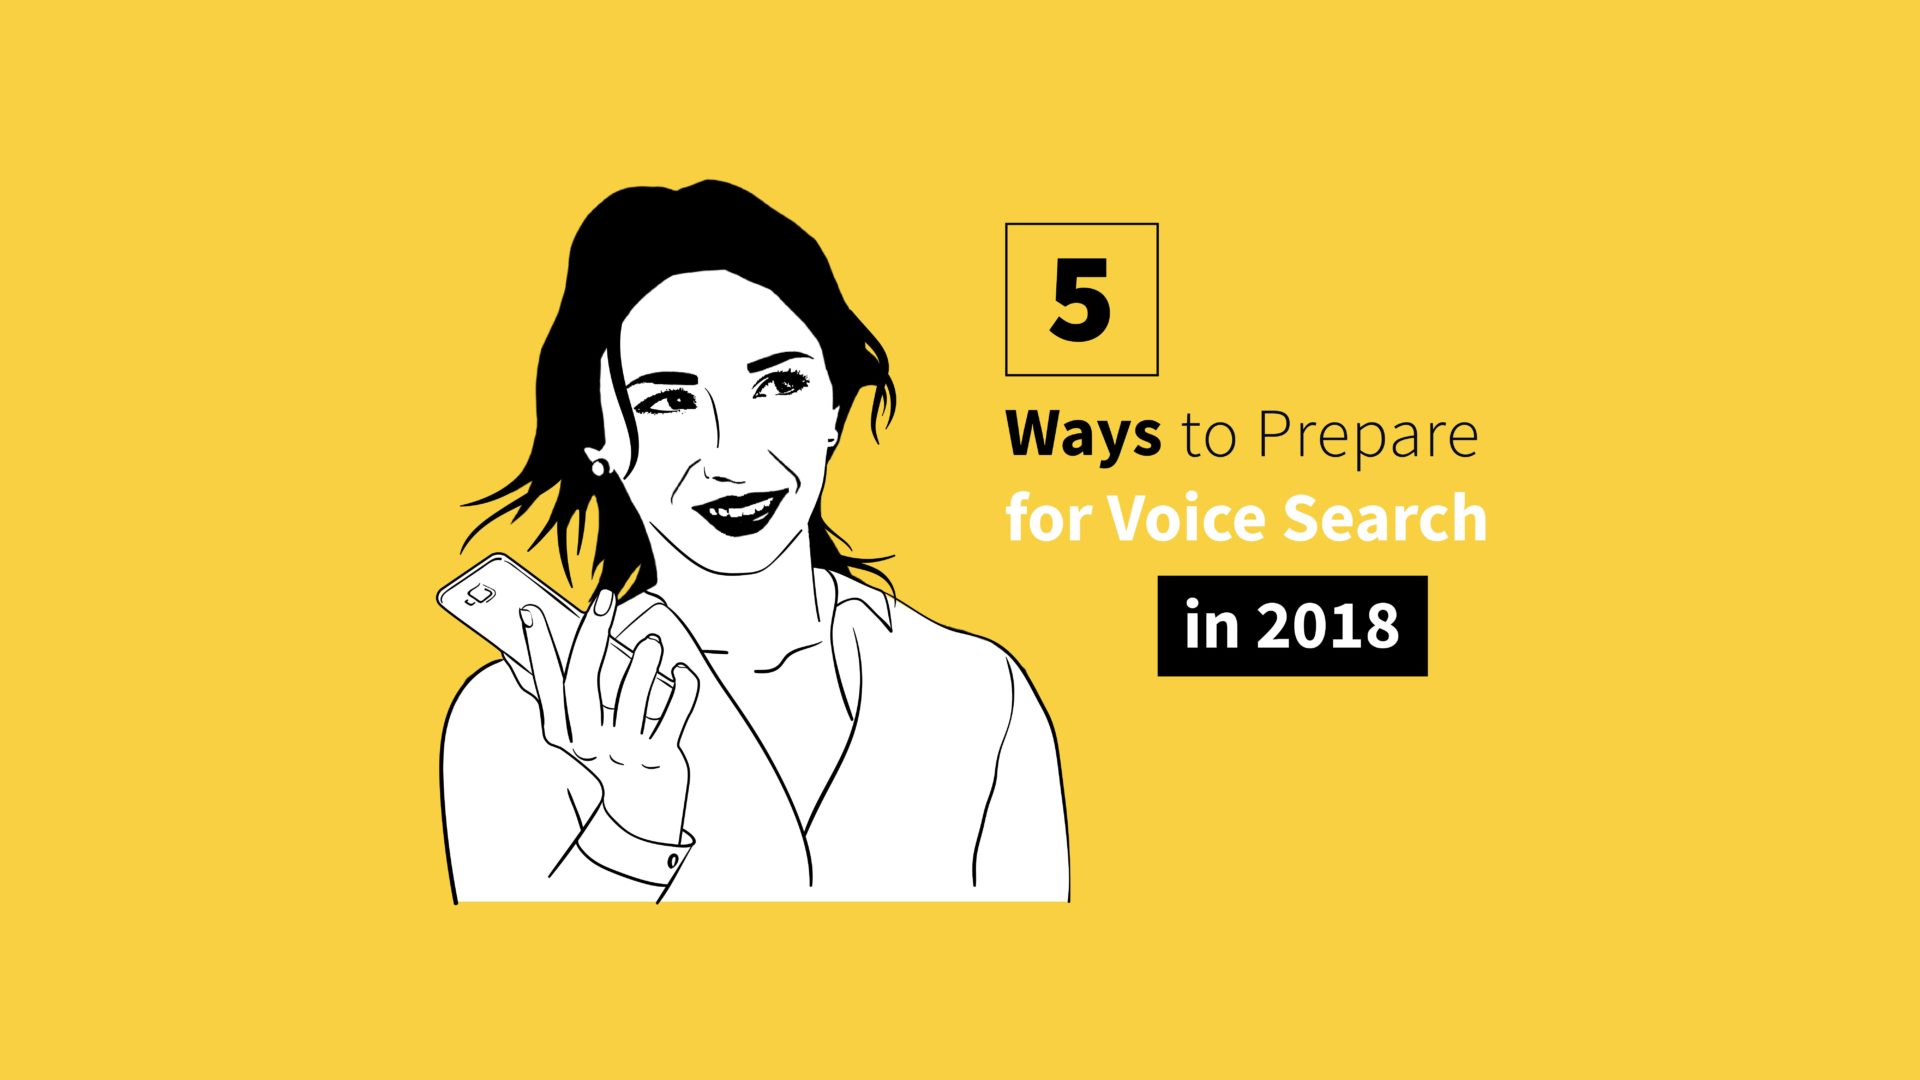 5 Ways to Prepare for Voice Search in 2018